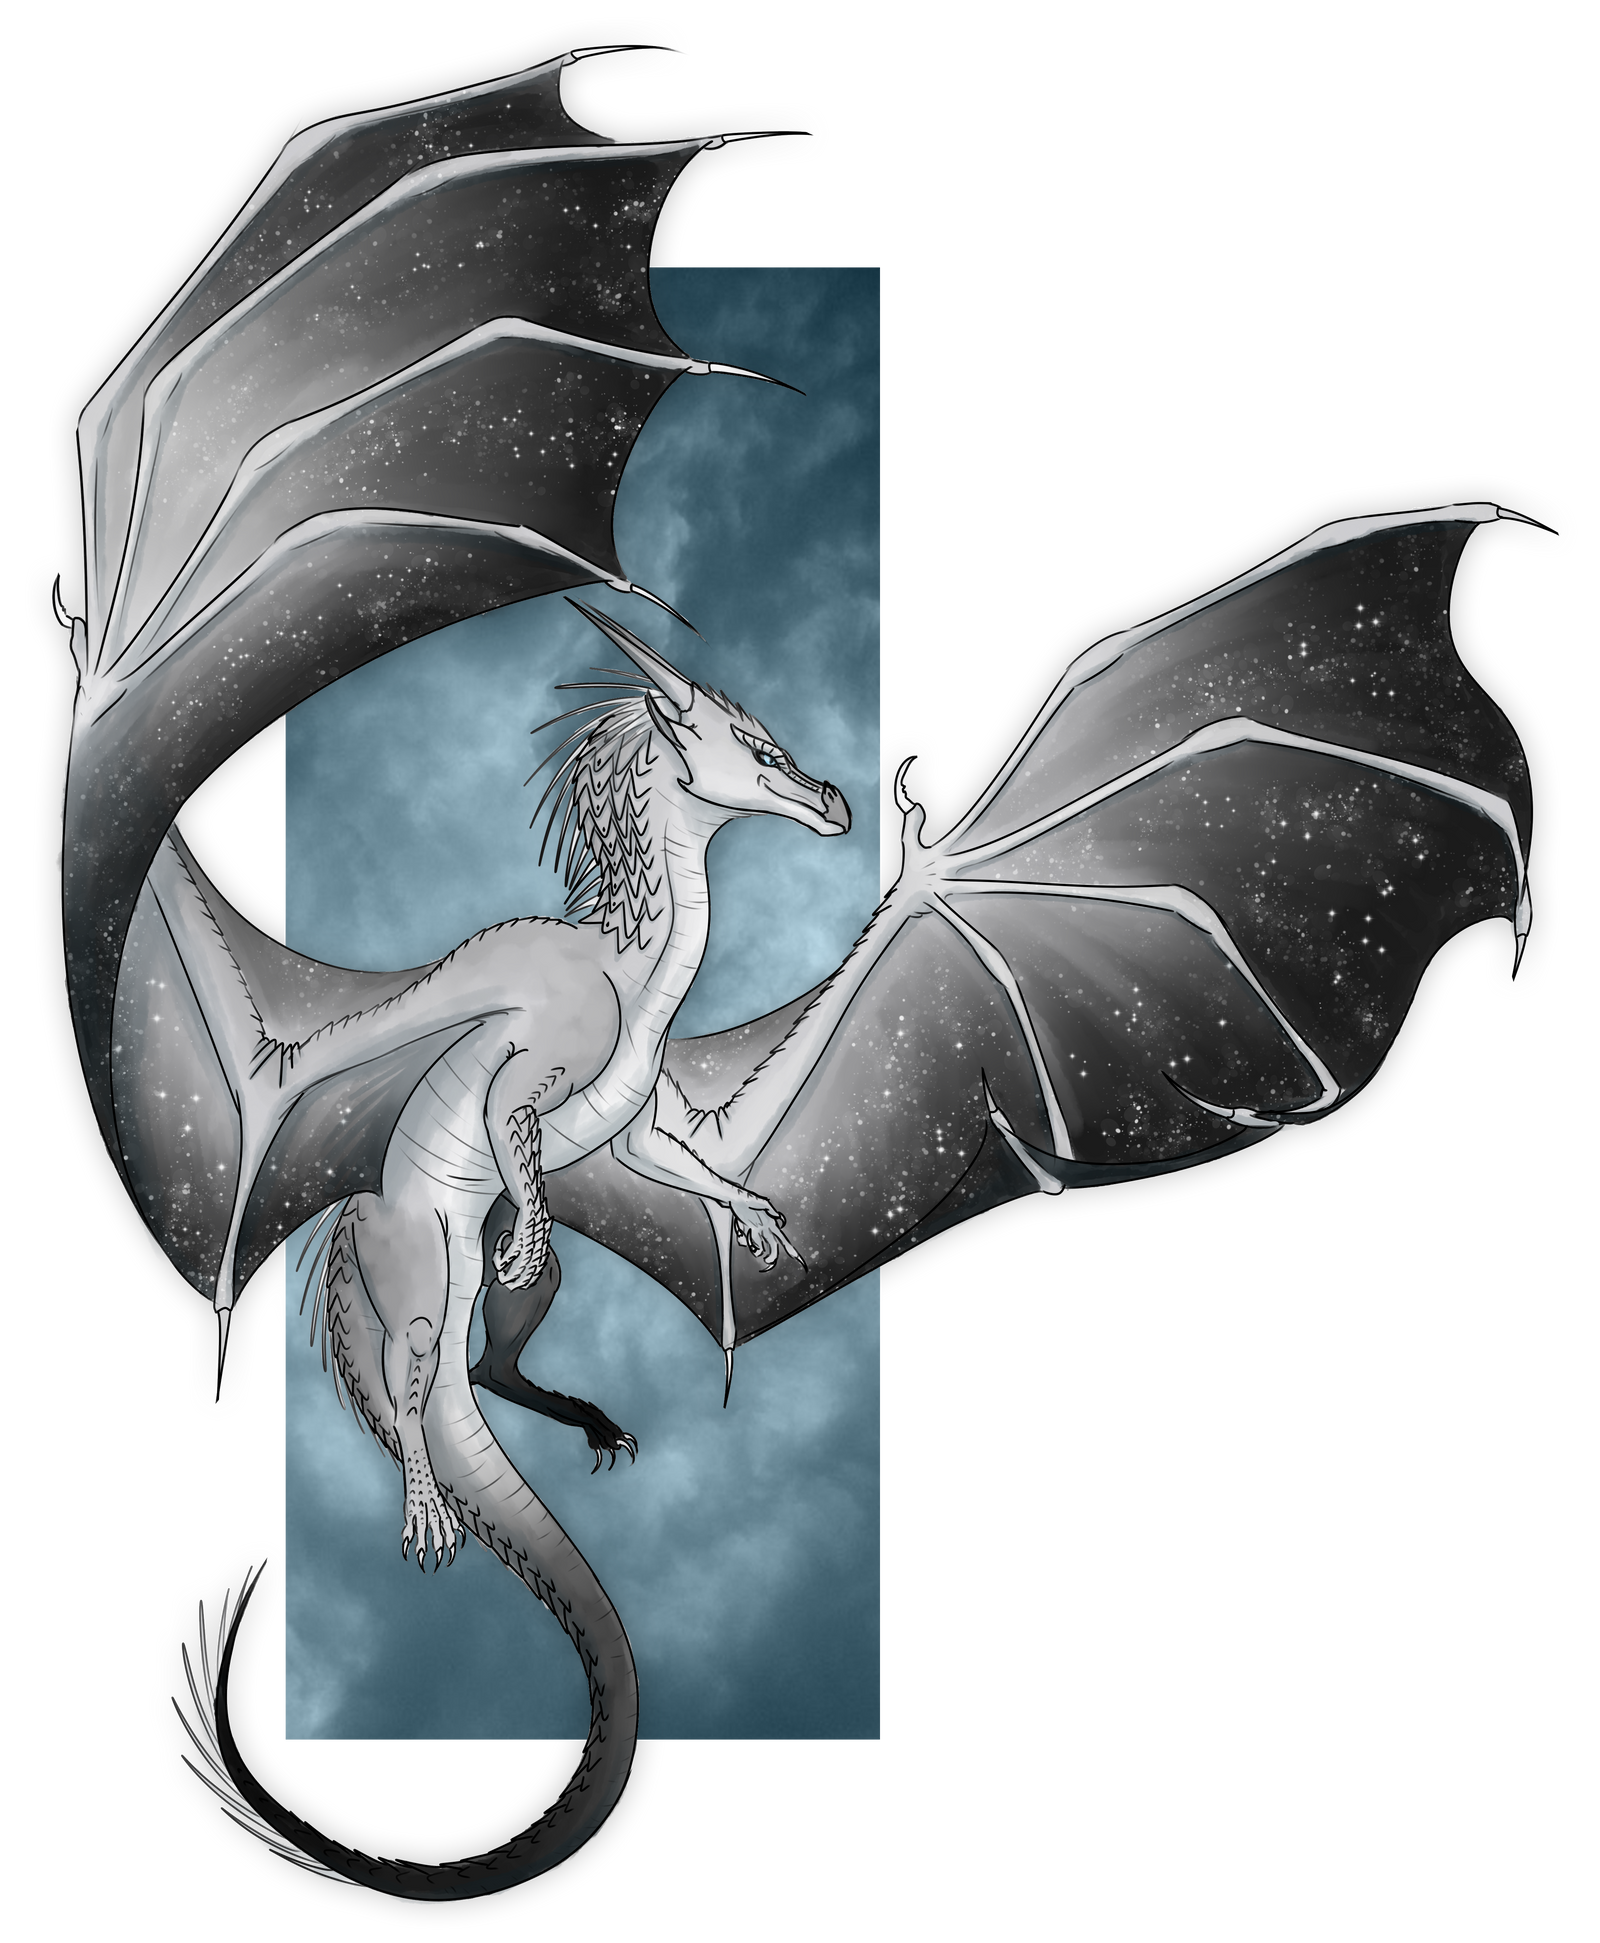 the_sky_is_overcasted_by_xthedragonrebornx-dafamtl.png